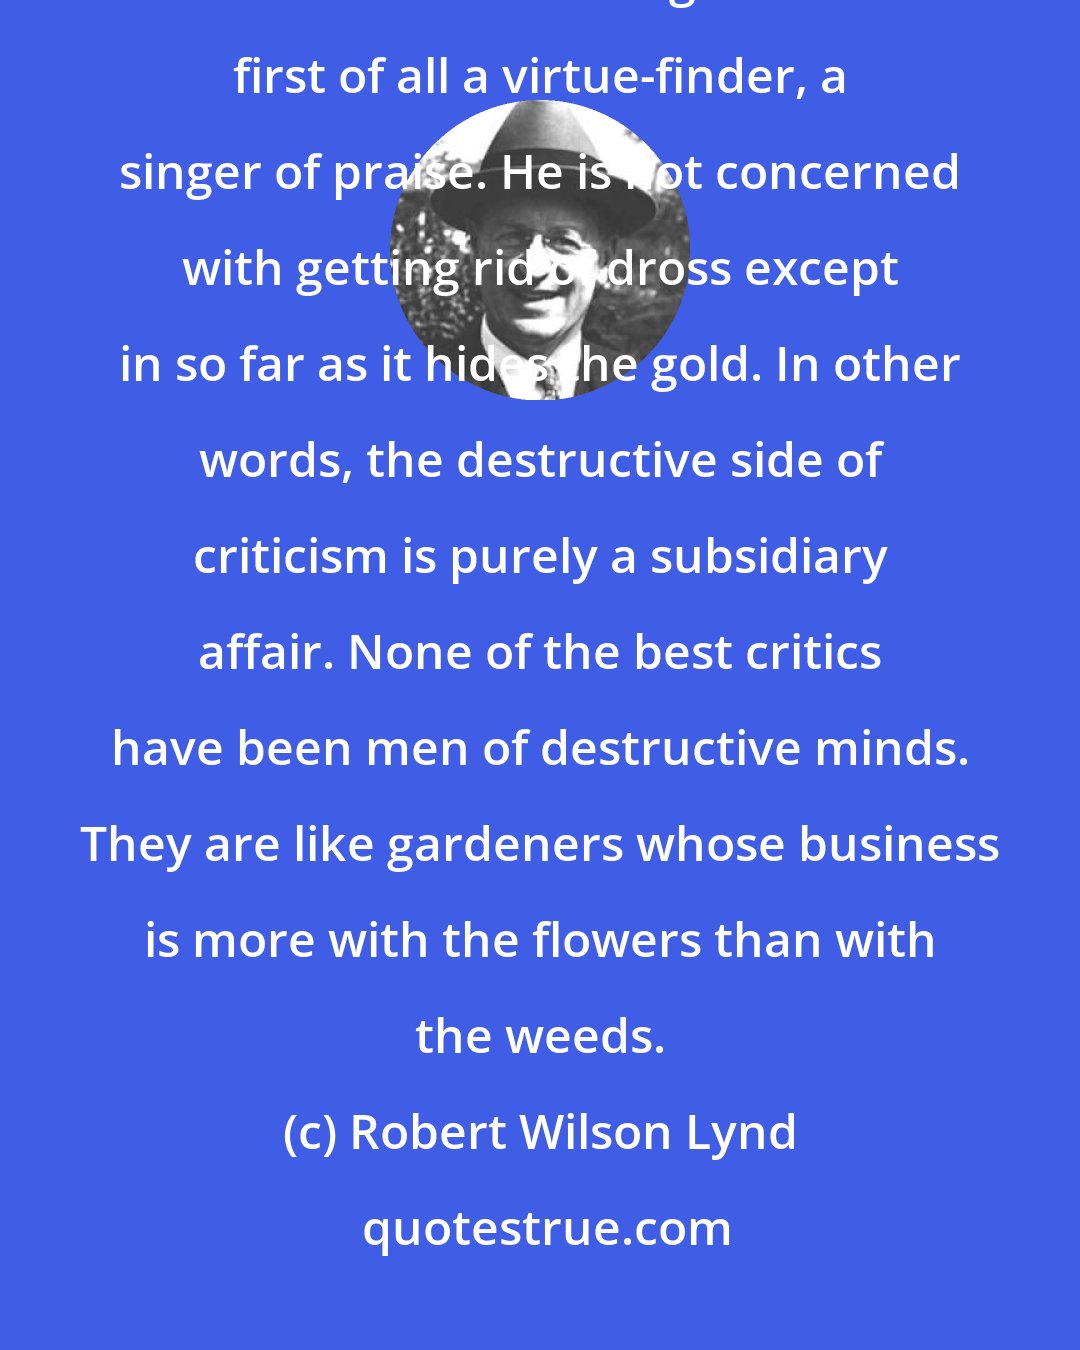 Robert Wilson Lynd: On the whole, however, the critic is far less of a professional faultfinder than is sometimes imagined. He is first of all a virtue-finder, a singer of praise. He is not concerned with getting rid of dross except in so far as it hides the gold. In other words, the destructive side of criticism is purely a subsidiary affair. None of the best critics have been men of destructive minds. They are like gardeners whose business is more with the flowers than with the weeds.